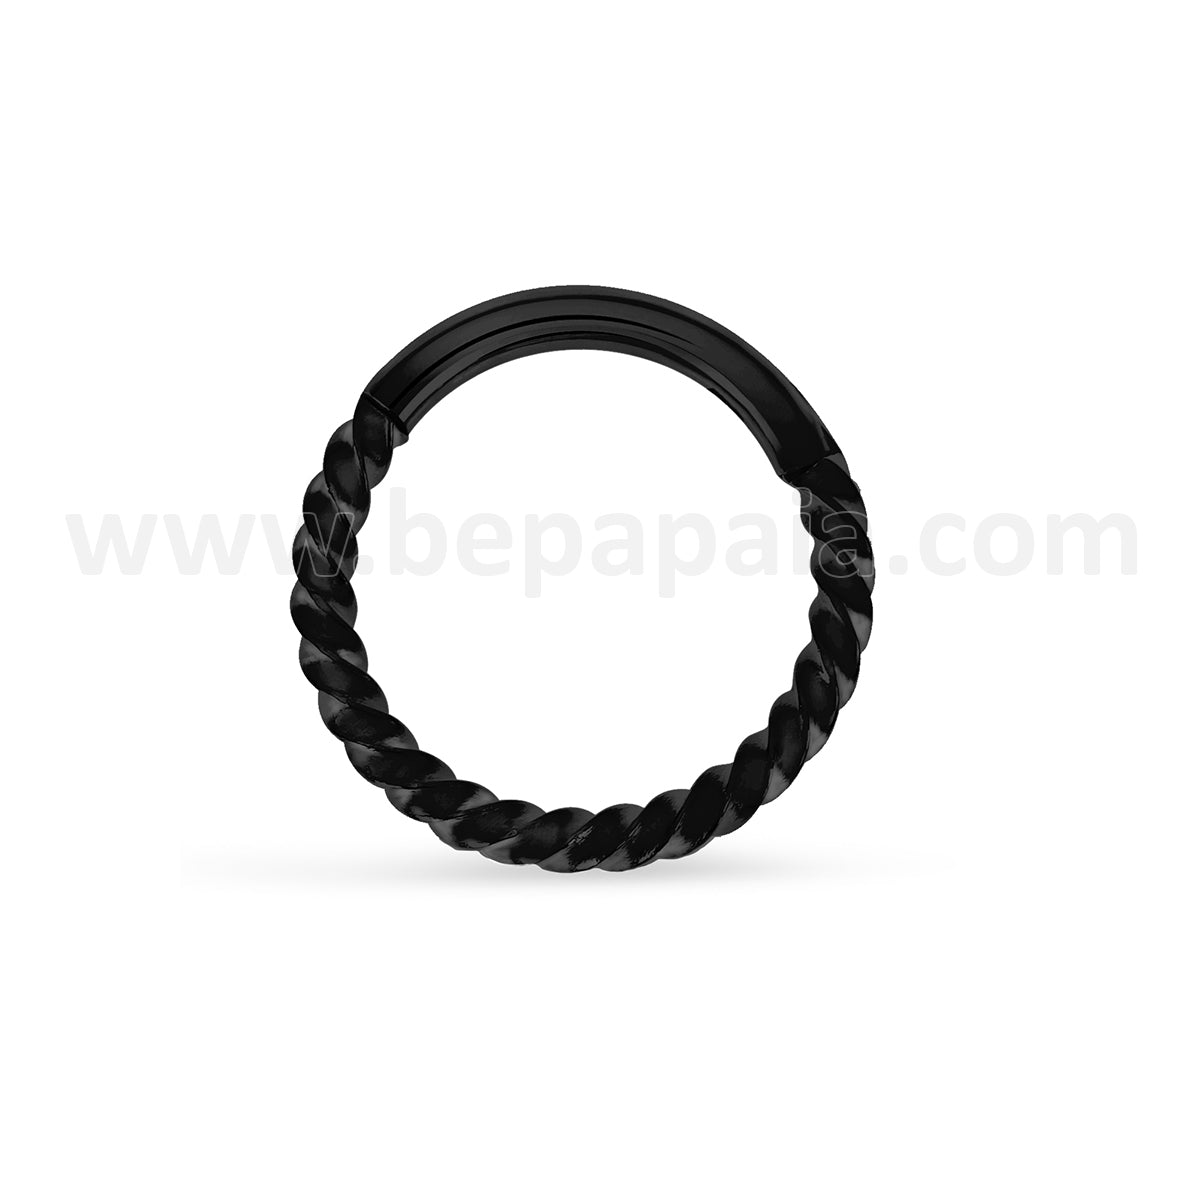 Surgical steel hinged segment ring braided